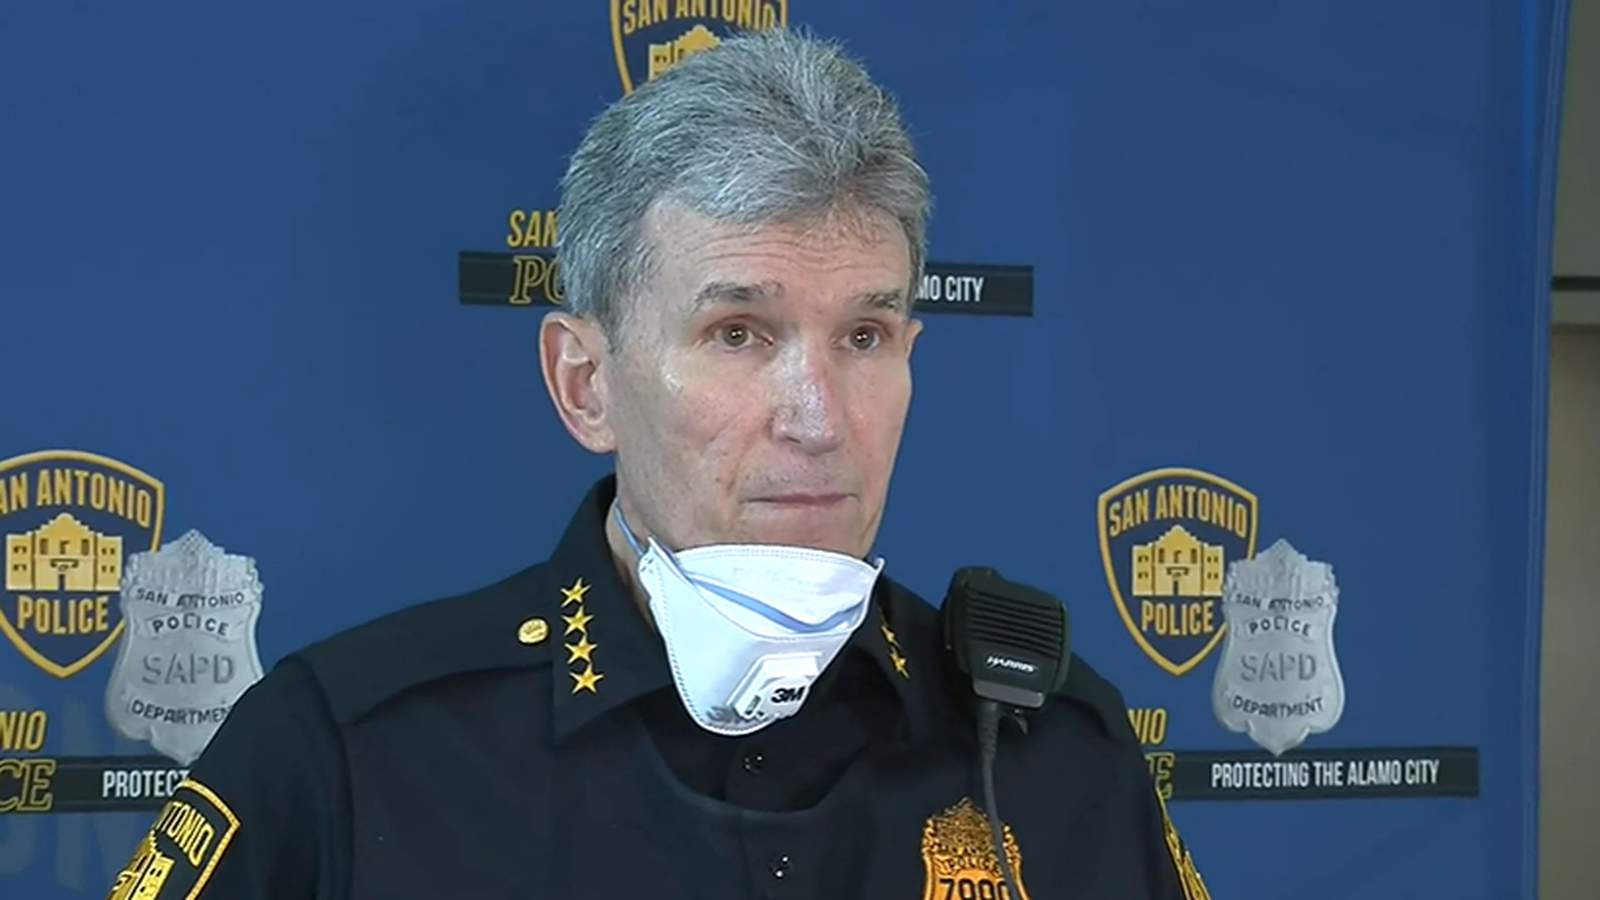 WATCH: San Antonio police will have ‘massive show of force’ at protest over George Floyd’s killing